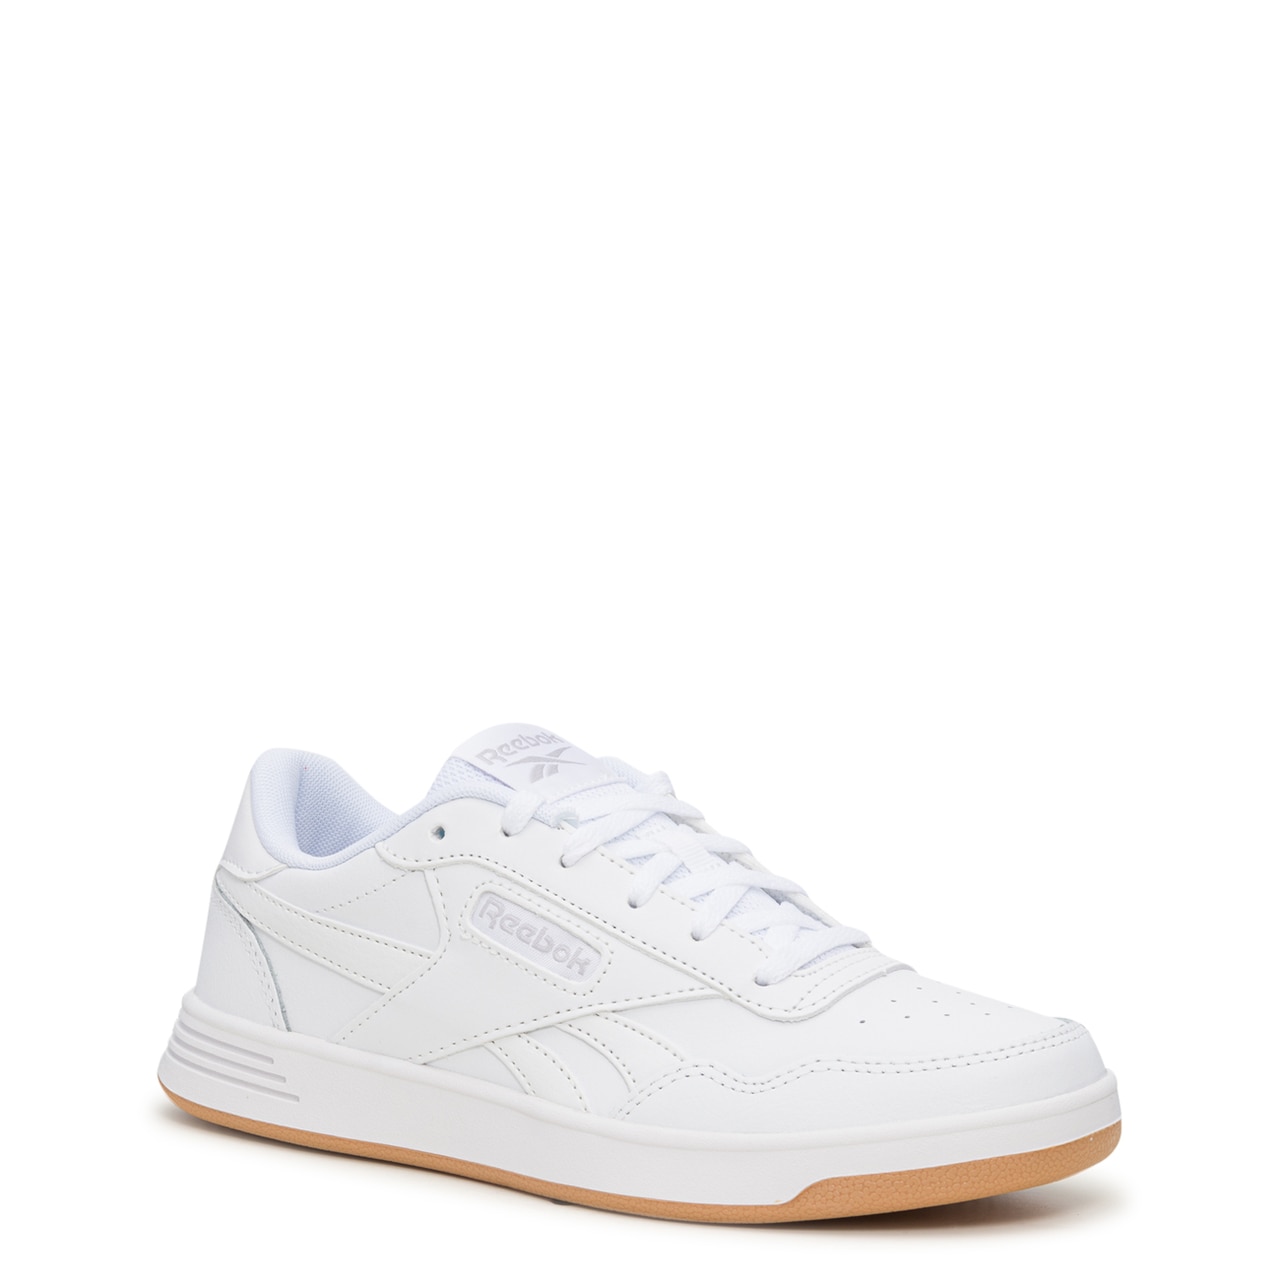 Reebok, Shop Clothing and Sneakers Online